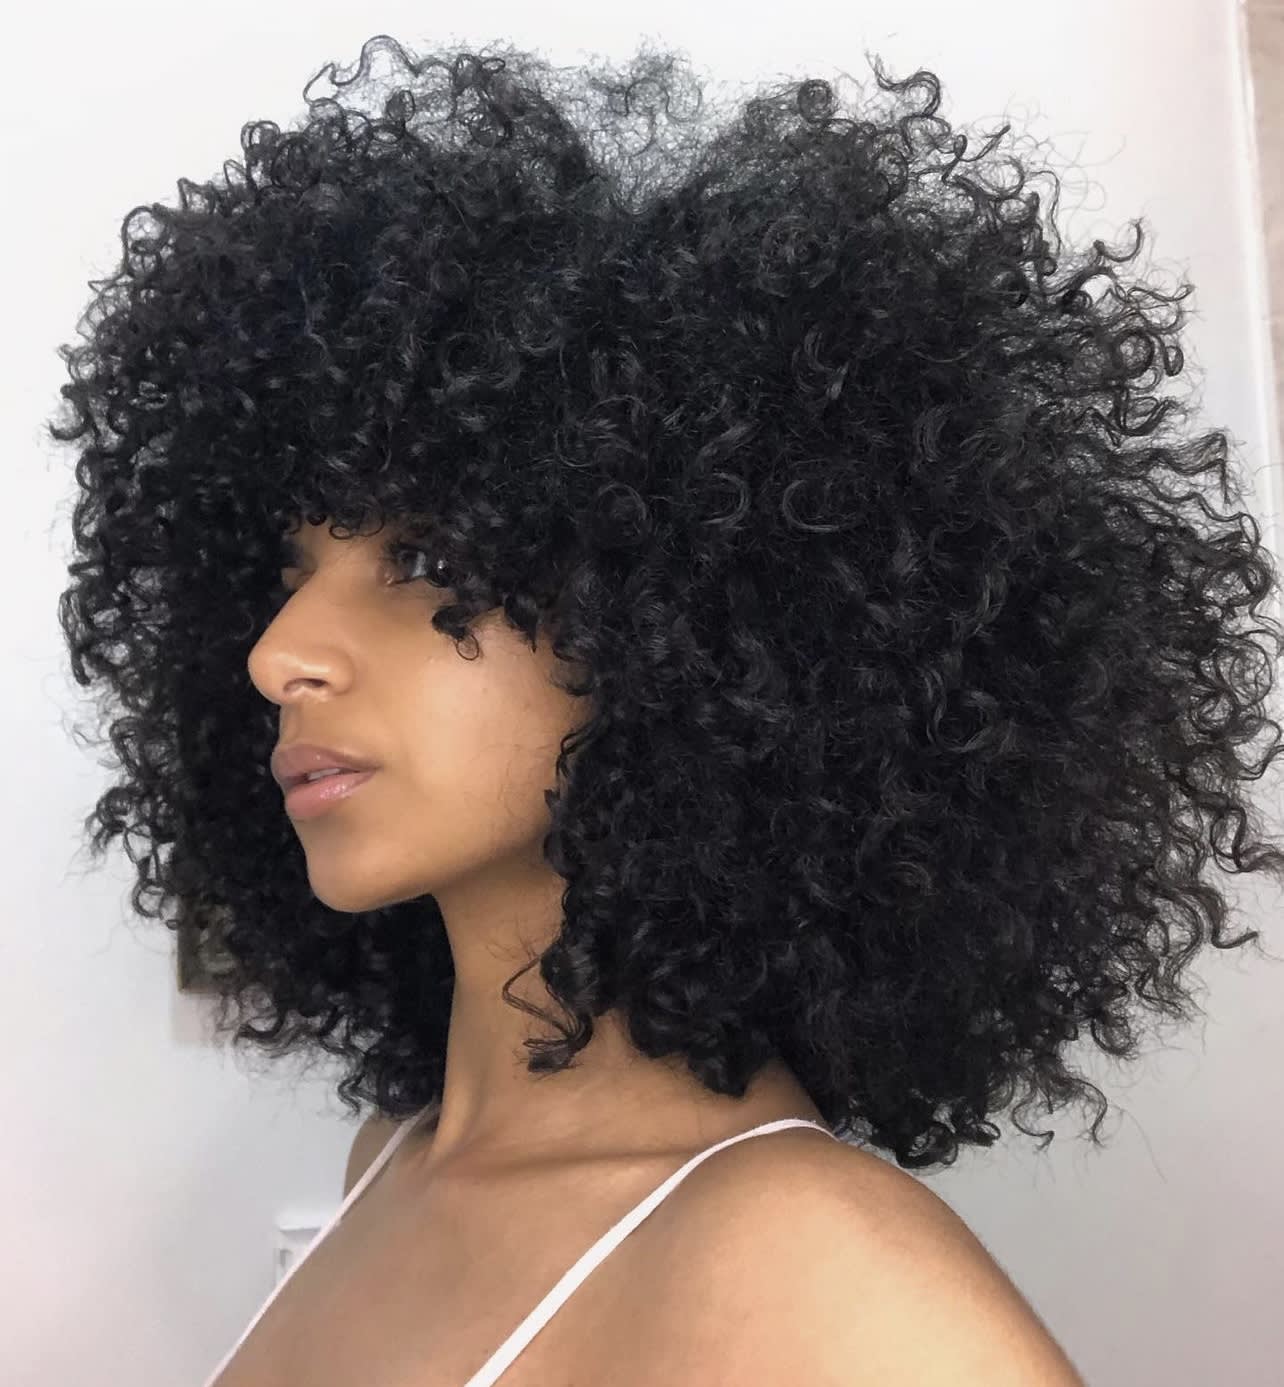 Ladies, it's time to embrace your natural, curly hair - CNA